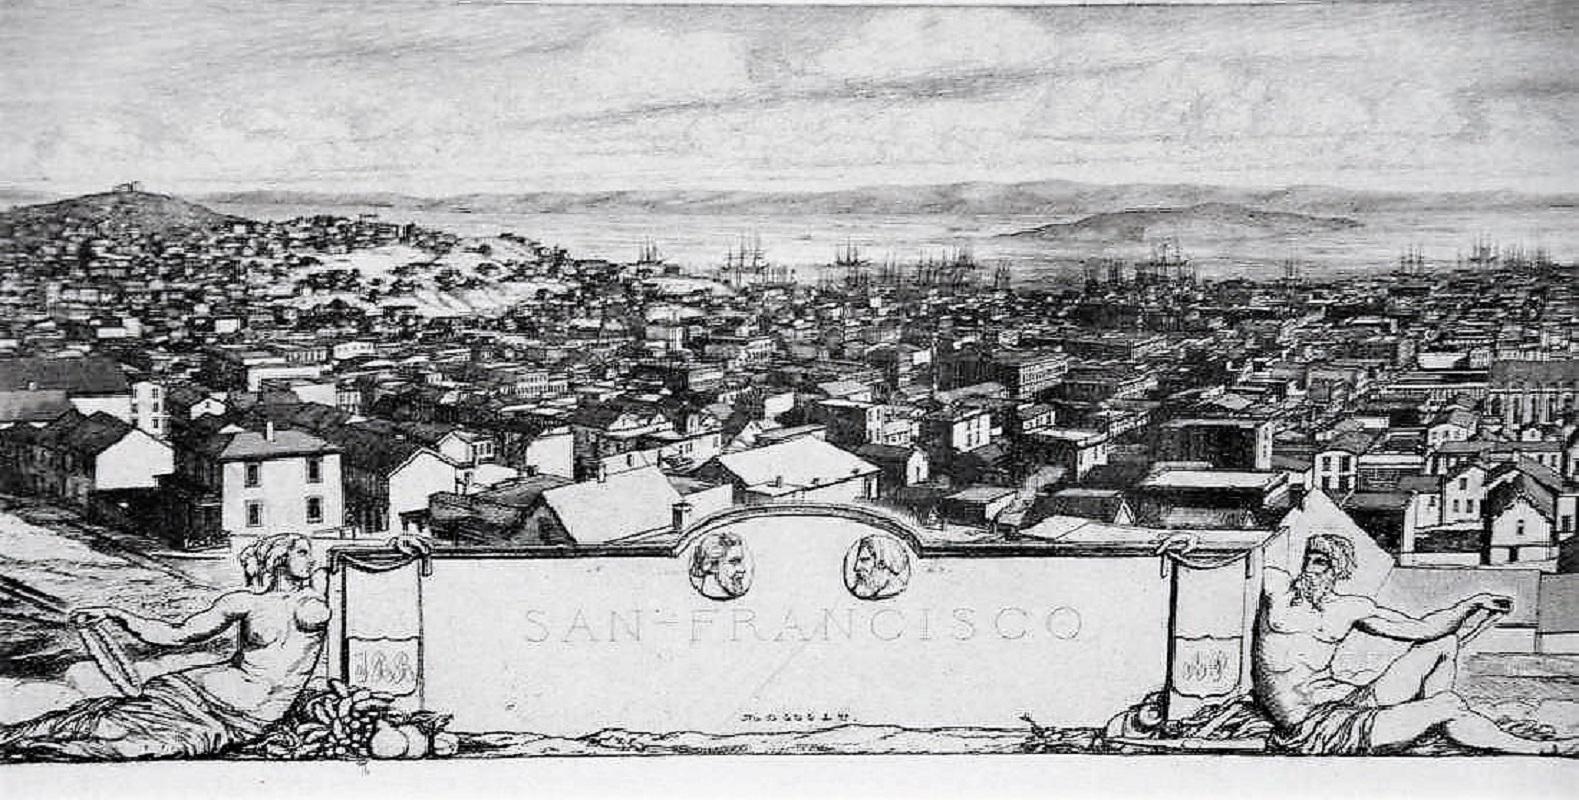 San Francisco. 1855-56. Etching on steel, based upon photographs. Delteil-Wright catalog 73; Schneiderman catalog  54 state iv (with lettering). 9 1/2 x 39 1/4 (sheet - sight size 8 1/8 x 38 1/2). frame 16 x 45 1/2). Printed by A. Delâtre in an